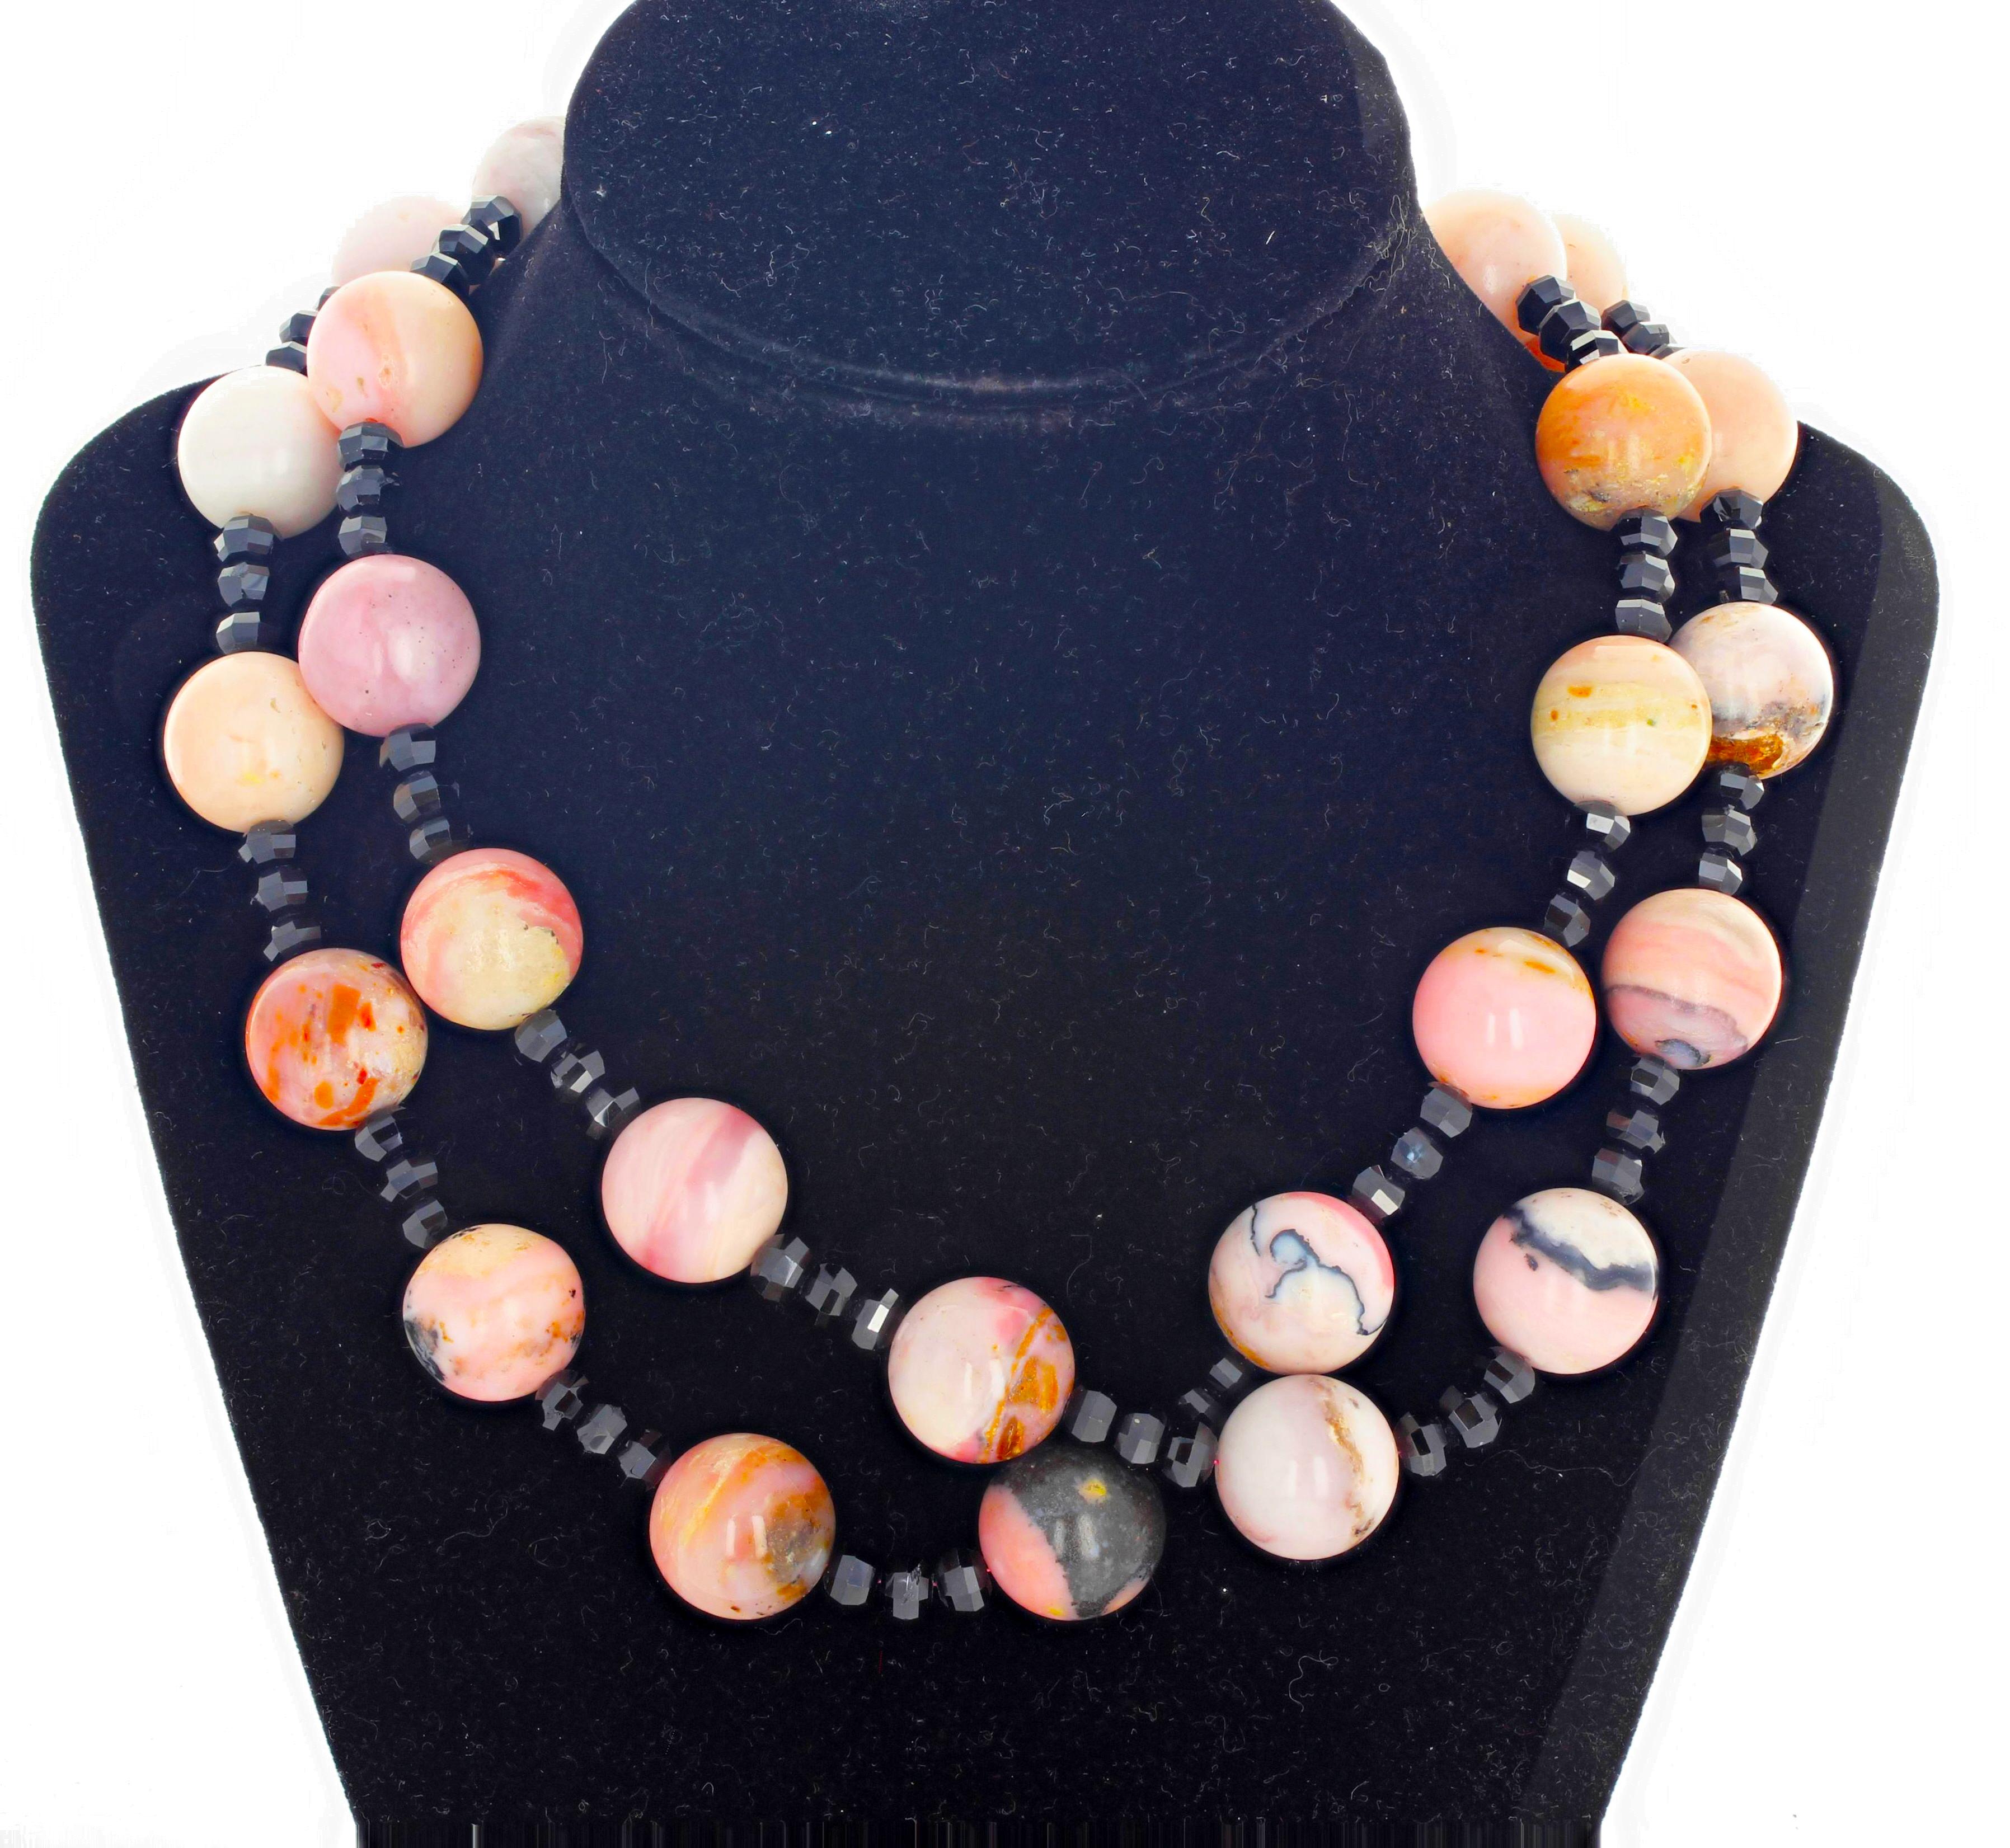 This double strand of RARE and stunning highly polished natural Peruvian Opals (16 mm) enhanced by the glistening gem cut black Spinel rondels set in a 17.5 inch long necklace with silver plated easy to use hook clasp.  